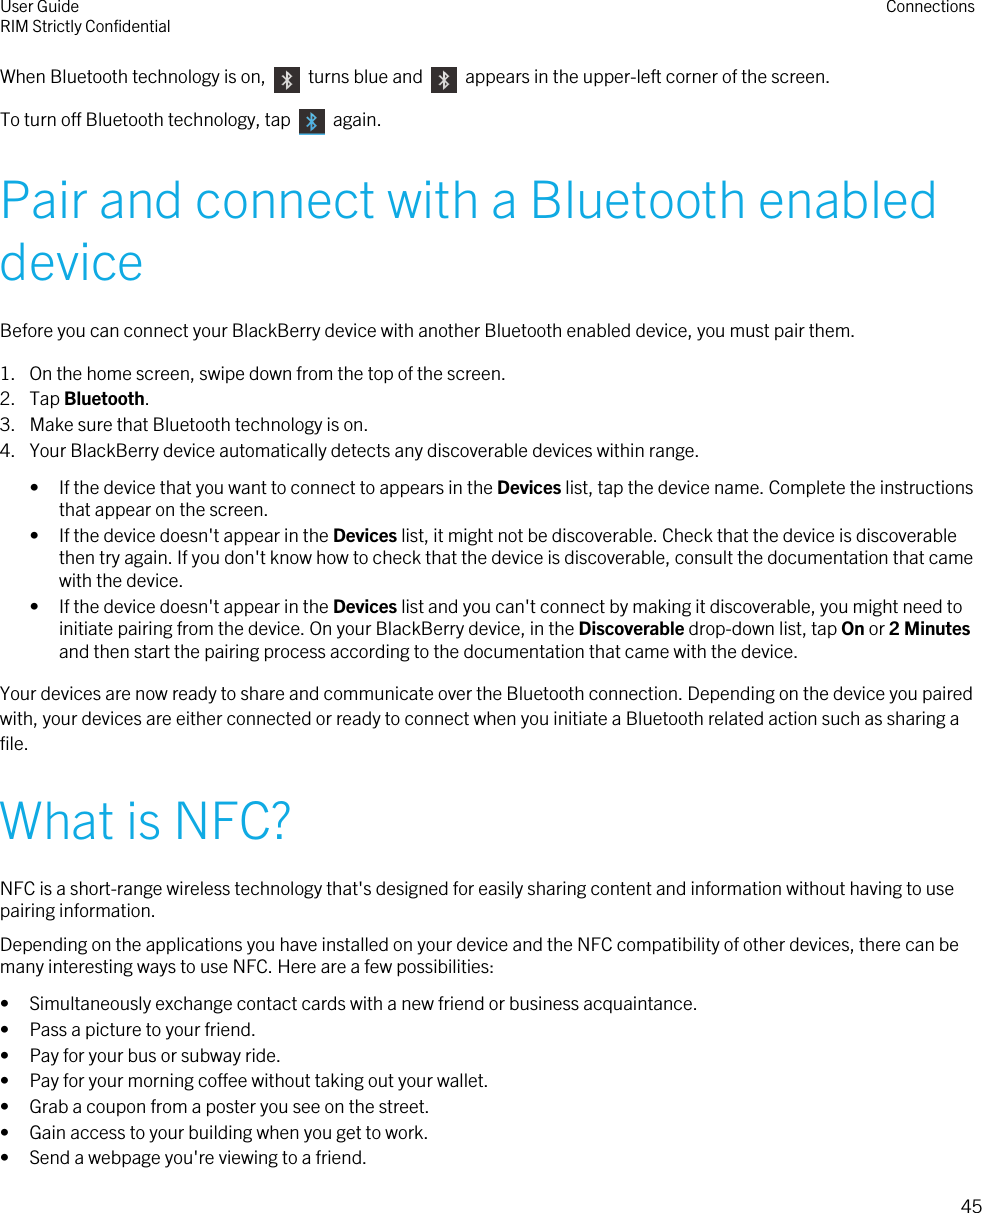 When Bluetooth technology is on,    turns blue and    appears in the upper-left corner of the screen.To turn off Bluetooth technology, tap    again.Pair and connect with a Bluetooth enableddeviceBefore you can connect your BlackBerry device with another Bluetooth enabled device, you must pair them.1. On the home screen, swipe down from the top of the screen.2. Tap Bluetooth.3. Make sure that Bluetooth technology is on.4. Your BlackBerry device automatically detects any discoverable devices within range.• If the device that you want to connect to appears in the Devices list, tap the device name. Complete the instructionsthat appear on the screen.• If the device doesn&apos;t appear in the Devices list, it might not be discoverable. Check that the device is discoverablethen try again. If you don&apos;t know how to check that the device is discoverable, consult the documentation that camewith the device.• If the device doesn&apos;t appear in the Devices list and you can&apos;t connect by making it discoverable, you might need toinitiate pairing from the device. On your BlackBerry device, in the Discoverable drop-down list, tap On or 2 Minutesand then start the pairing process according to the documentation that came with the device.Your devices are now ready to share and communicate over the Bluetooth connection. Depending on the device you pairedwith, your devices are either connected or ready to connect when you initiate a Bluetooth related action such as sharing afile.What is NFC?NFC is a short-range wireless technology that&apos;s designed for easily sharing content and information without having to usepairing information.Depending on the applications you have installed on your device and the NFC compatibility of other devices, there can bemany interesting ways to use NFC. Here are a few possibilities:• Simultaneously exchange contact cards with a new friend or business acquaintance.• Pass a picture to your friend.• Pay for your bus or subway ride.• Pay for your morning coffee without taking out your wallet.• Grab a coupon from a poster you see on the street.• Gain access to your building when you get to work.• Send a webpage you&apos;re viewing to a friend.User GuideRIM Strictly Confidential Connections45